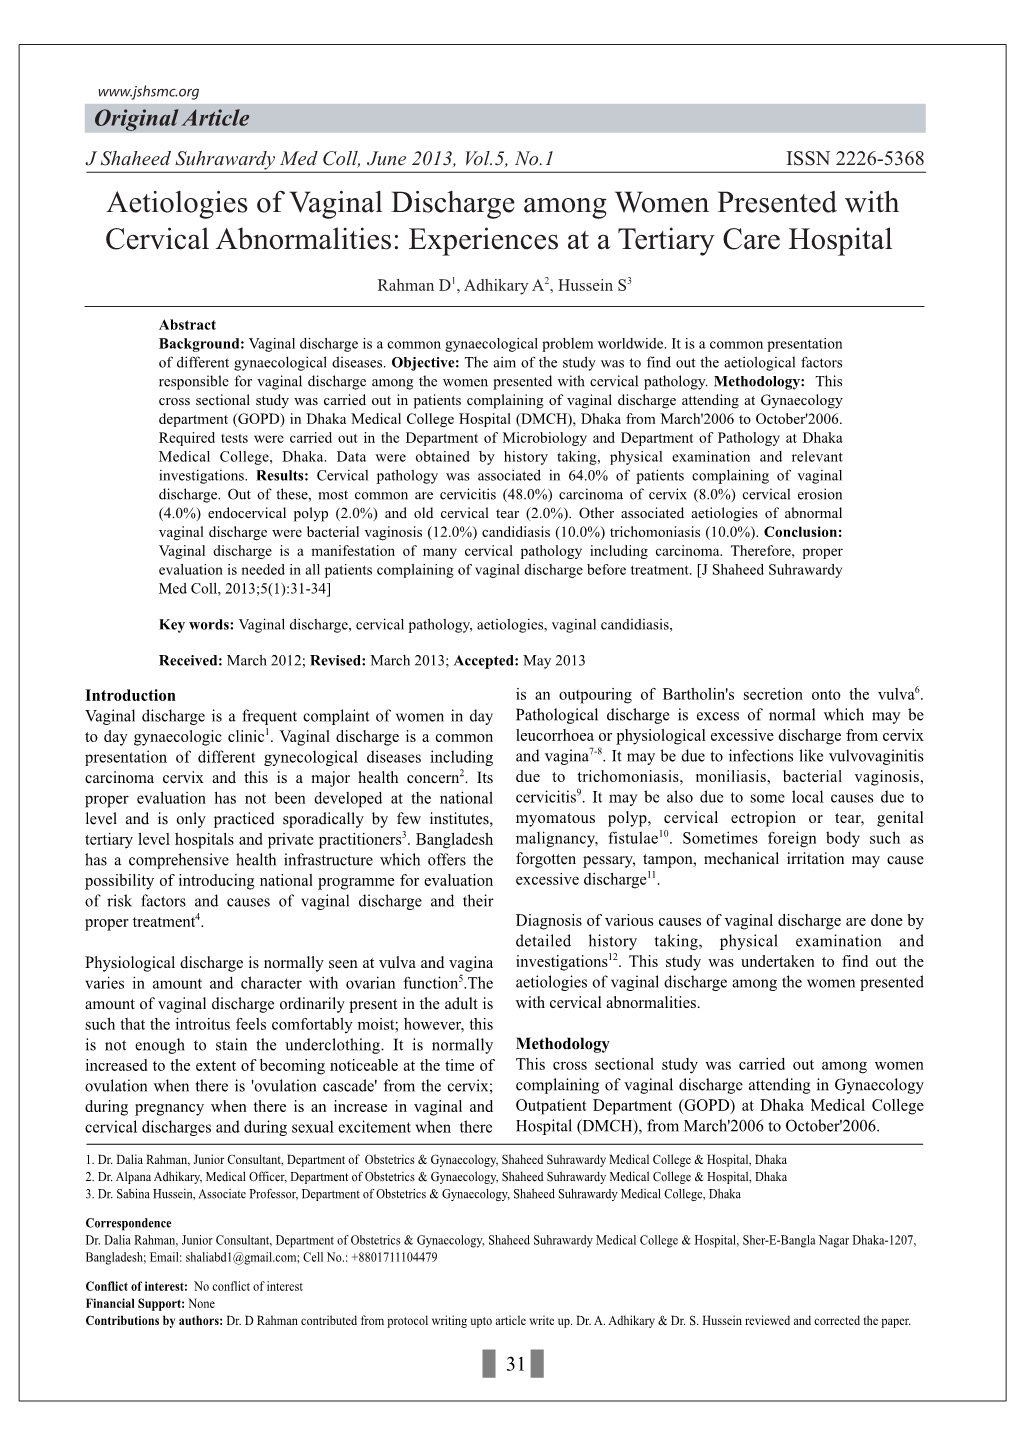 Aetiologies of Vaginal Discharge Among Women Presented with Cervical Abnormalities: Experiences at a Tertiary Care Hospital